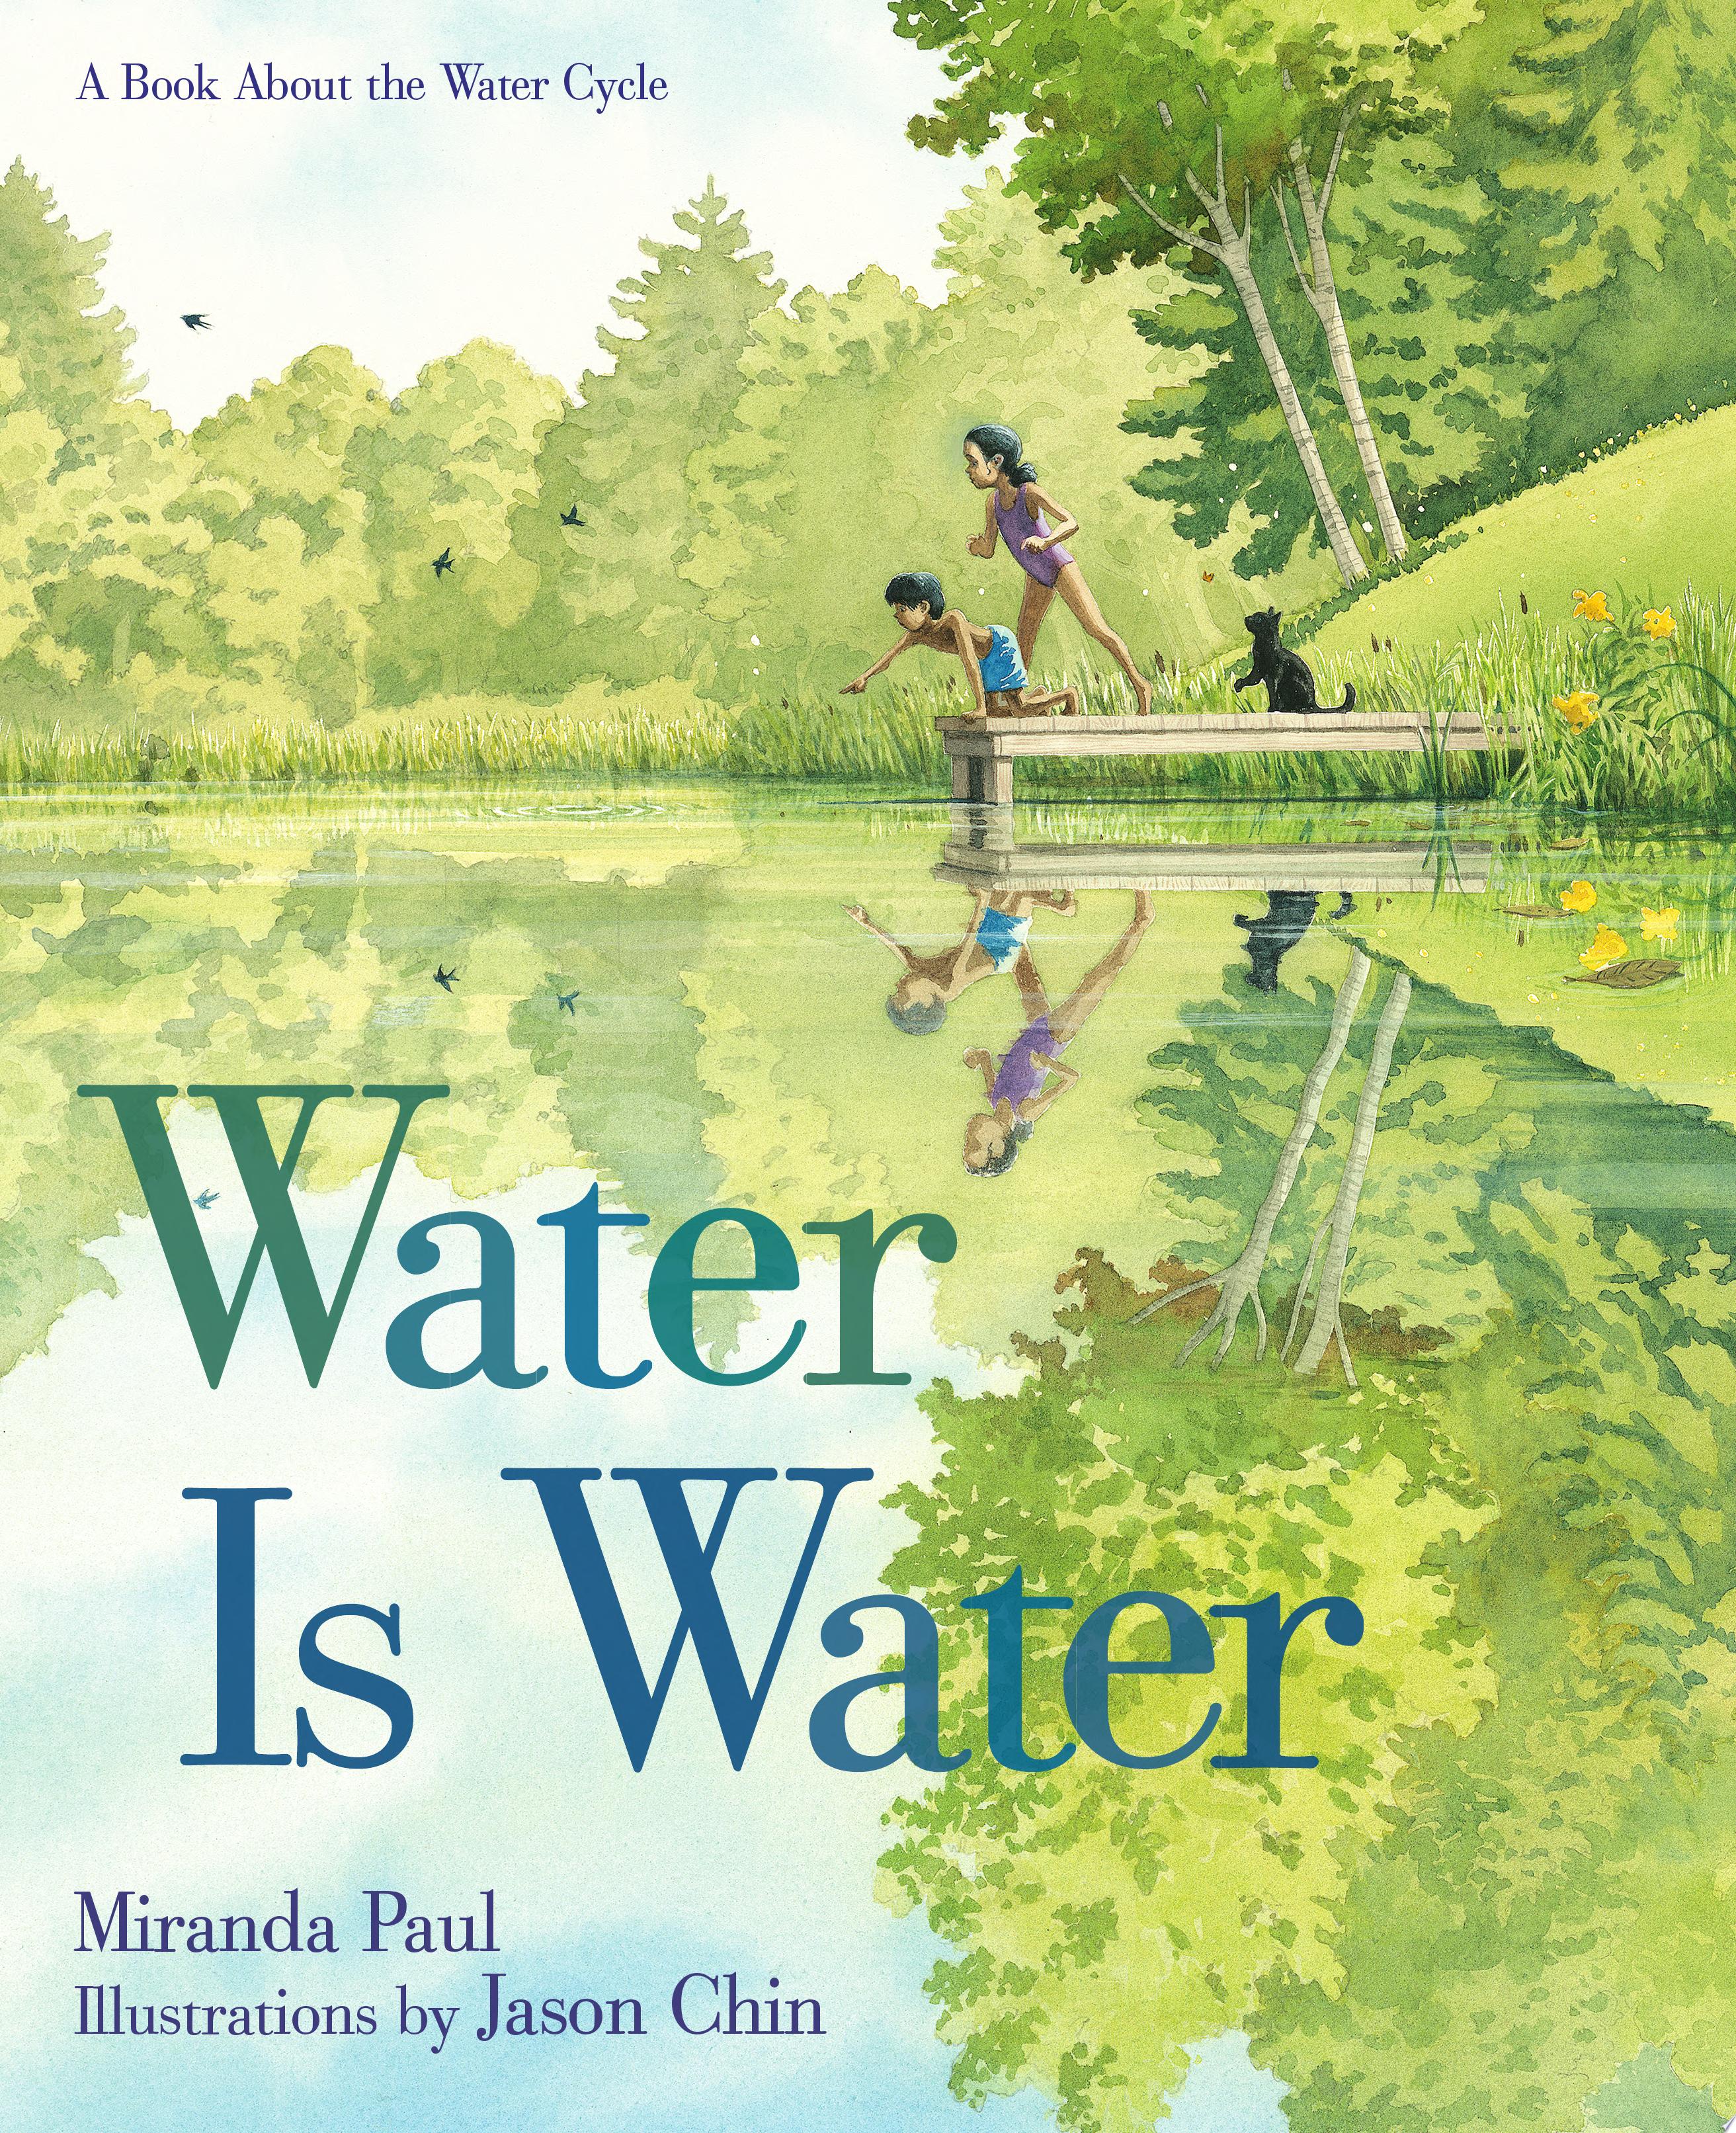 Image for "Water Is Water"